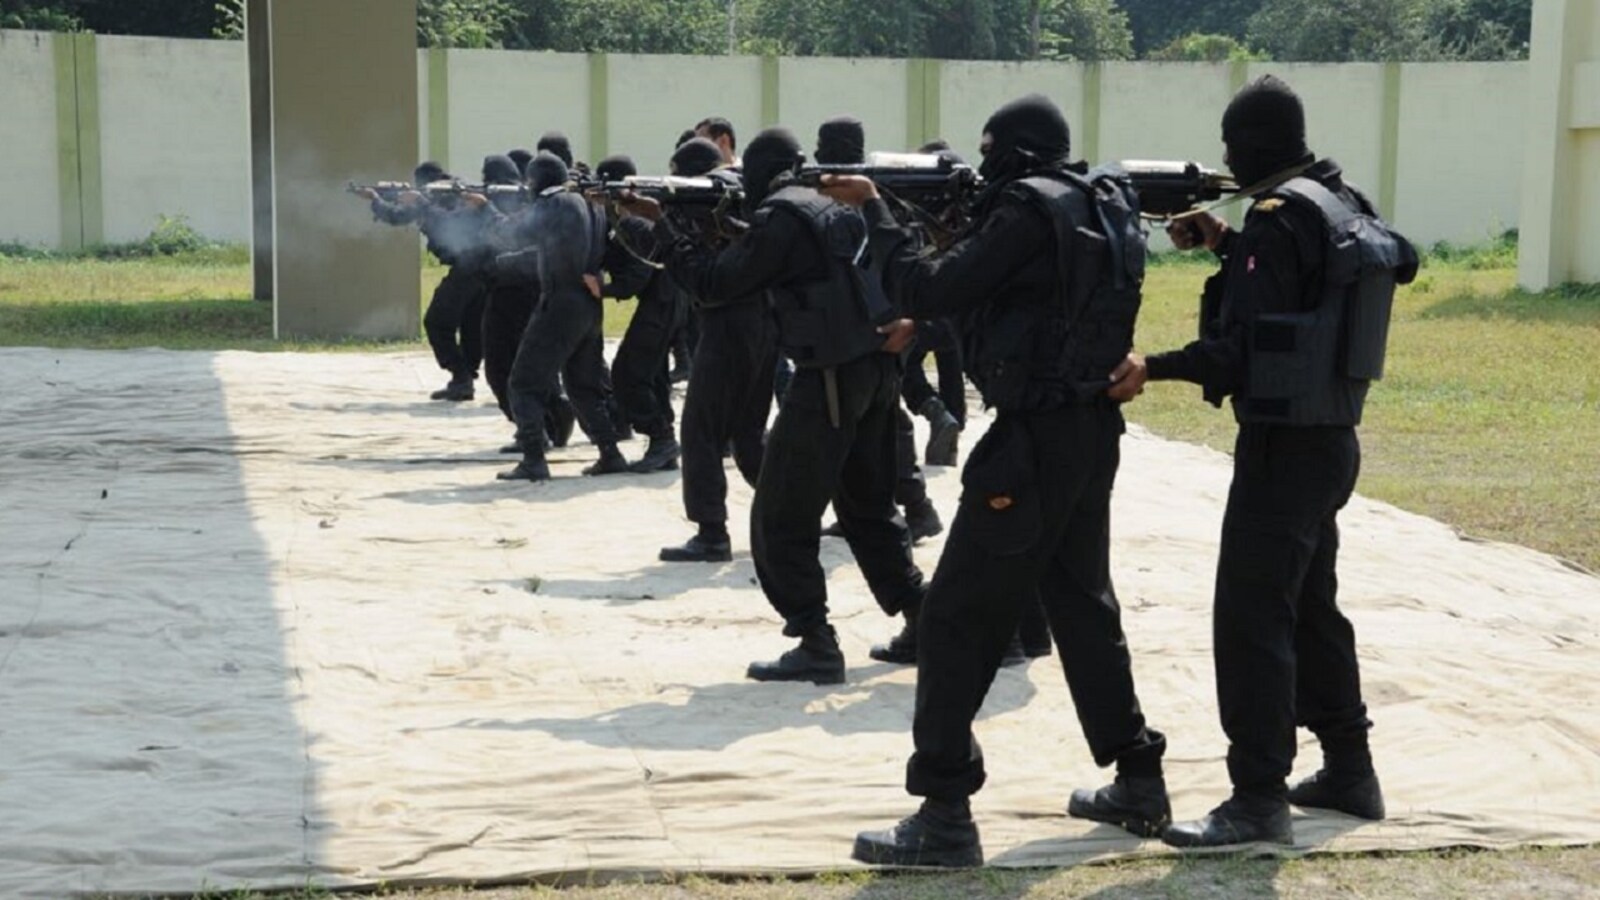 National Security Guard - All you need to know about NSG & SPG